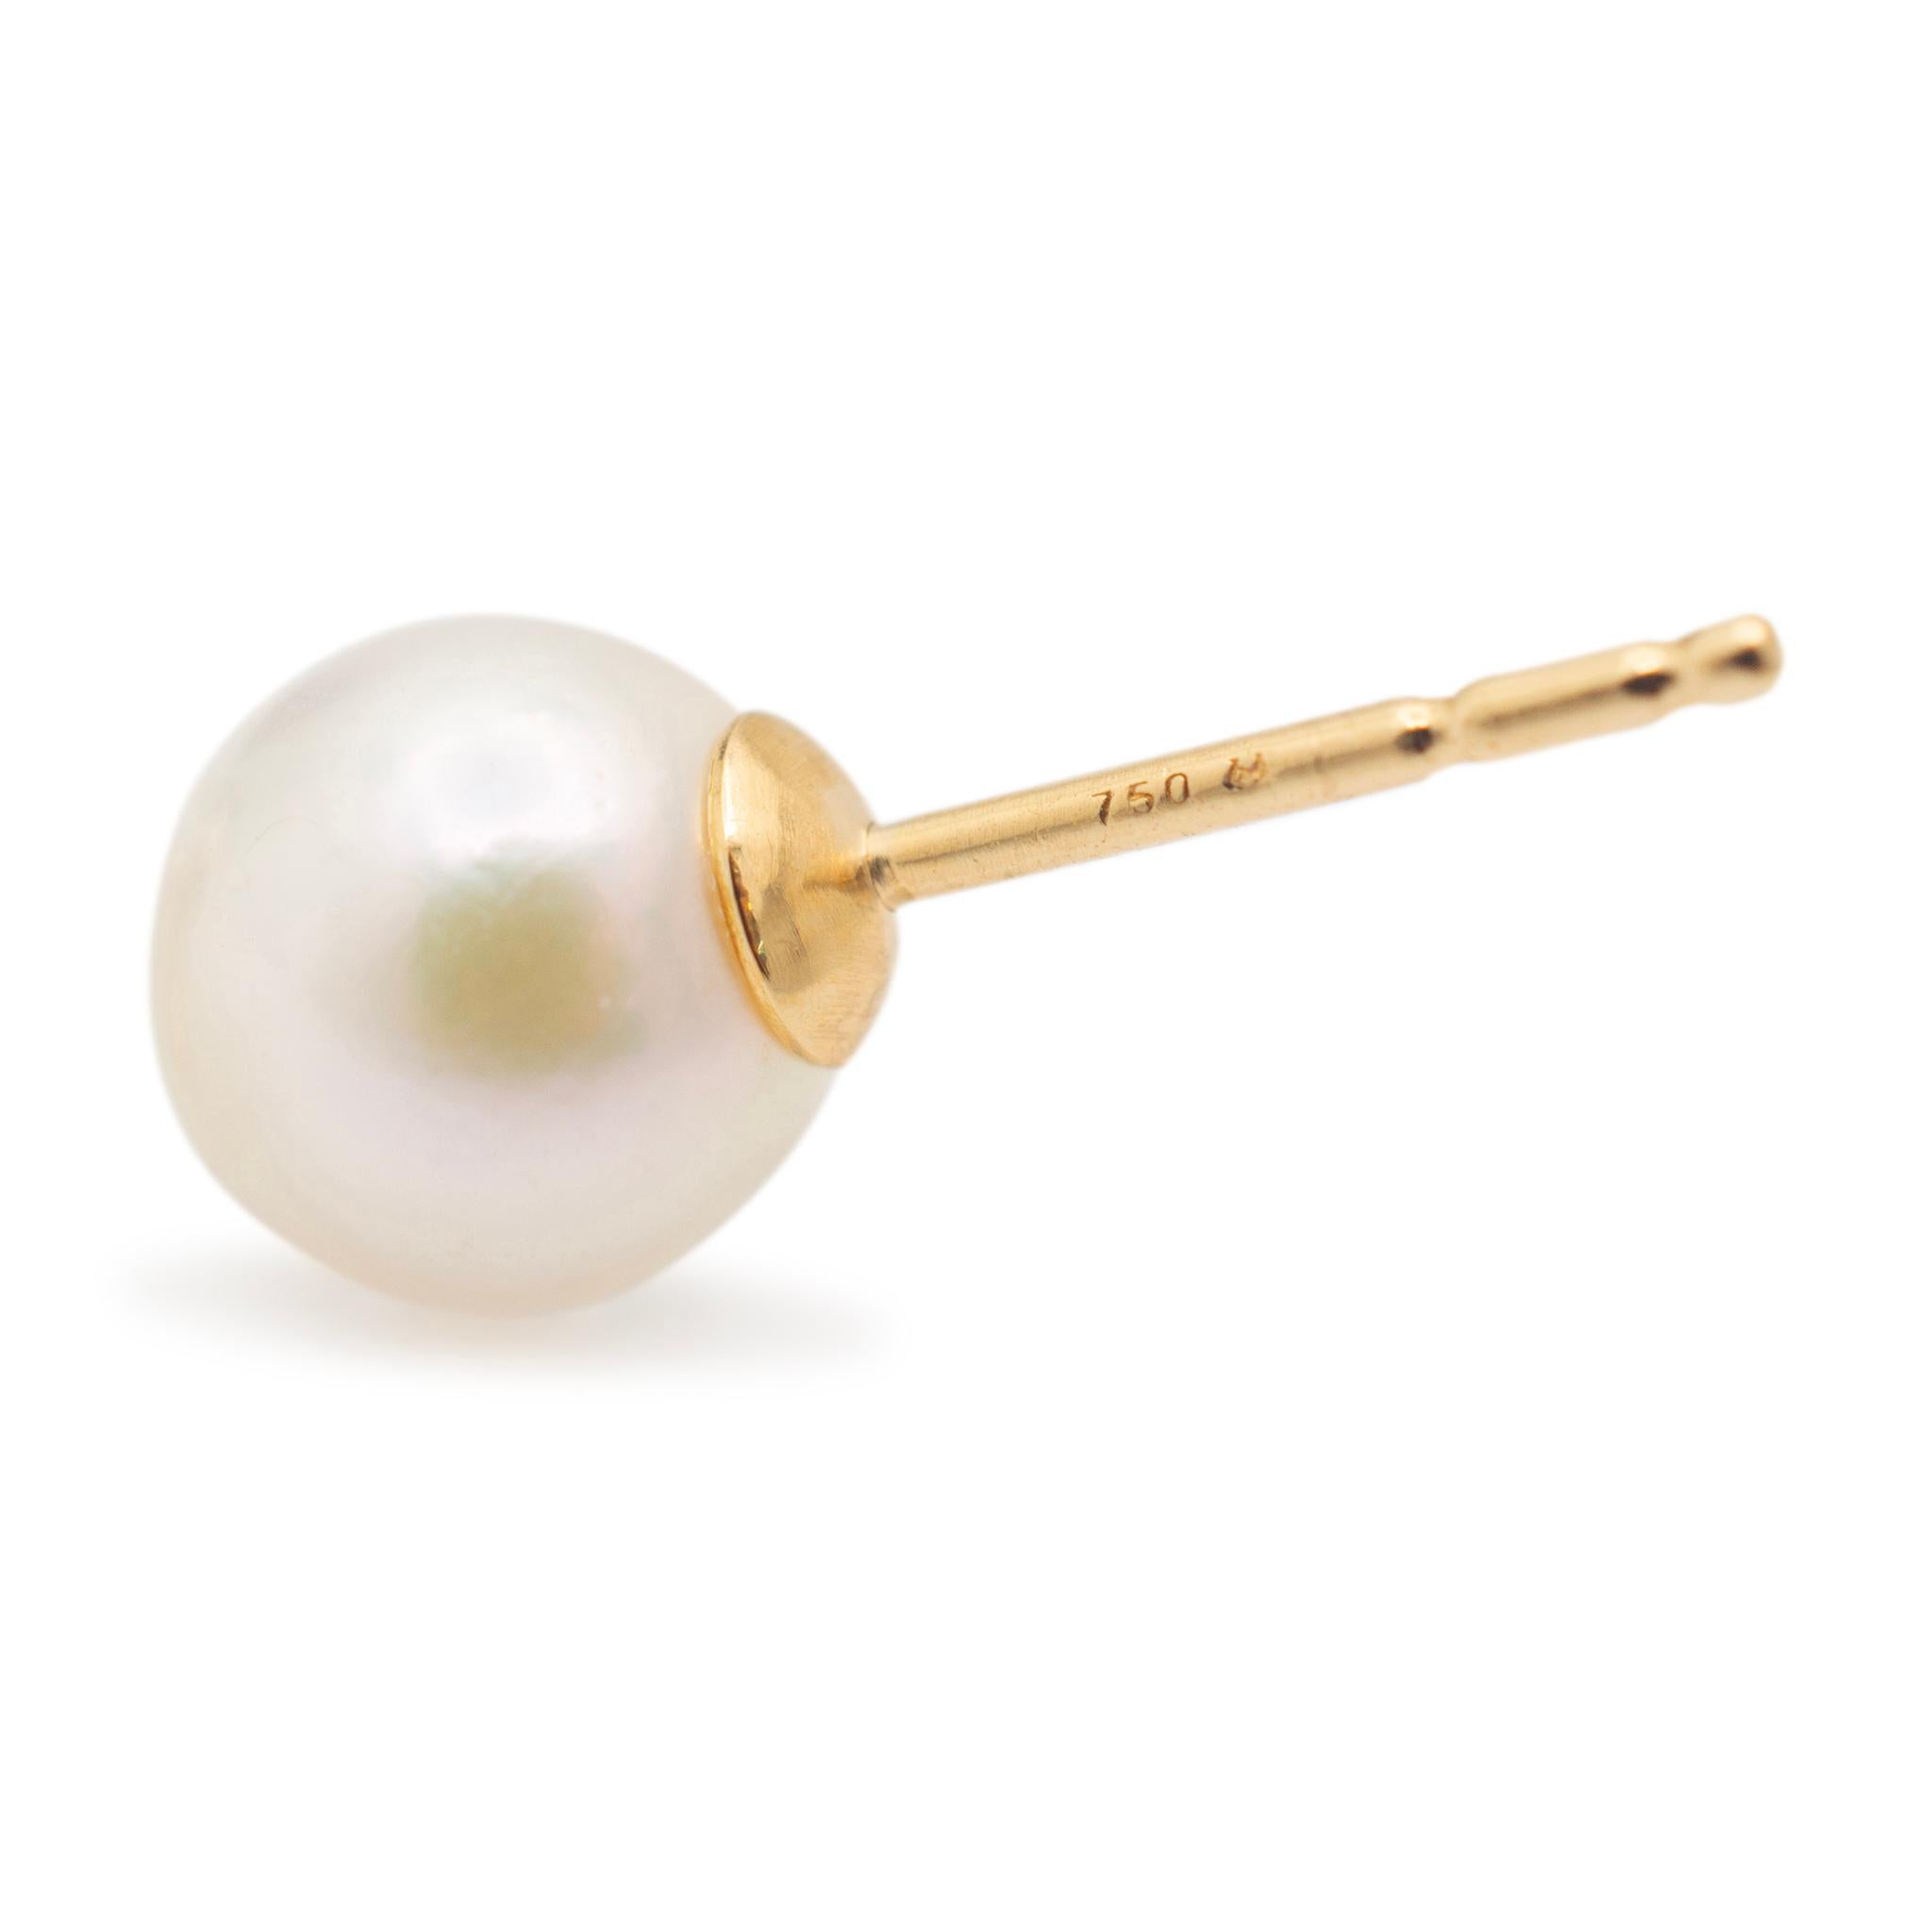 Brand: Mikimoto

Gender: Ladies

Metal Type: 18K Yellow Gold

Length: 0.50 Inches

Diameter: 7.50 mm

Weight: 2.12 Grams

18K yellow gold pearl stud earrings with push backs. The metal was tested and determined to be 18K yellow gold. Engraved with